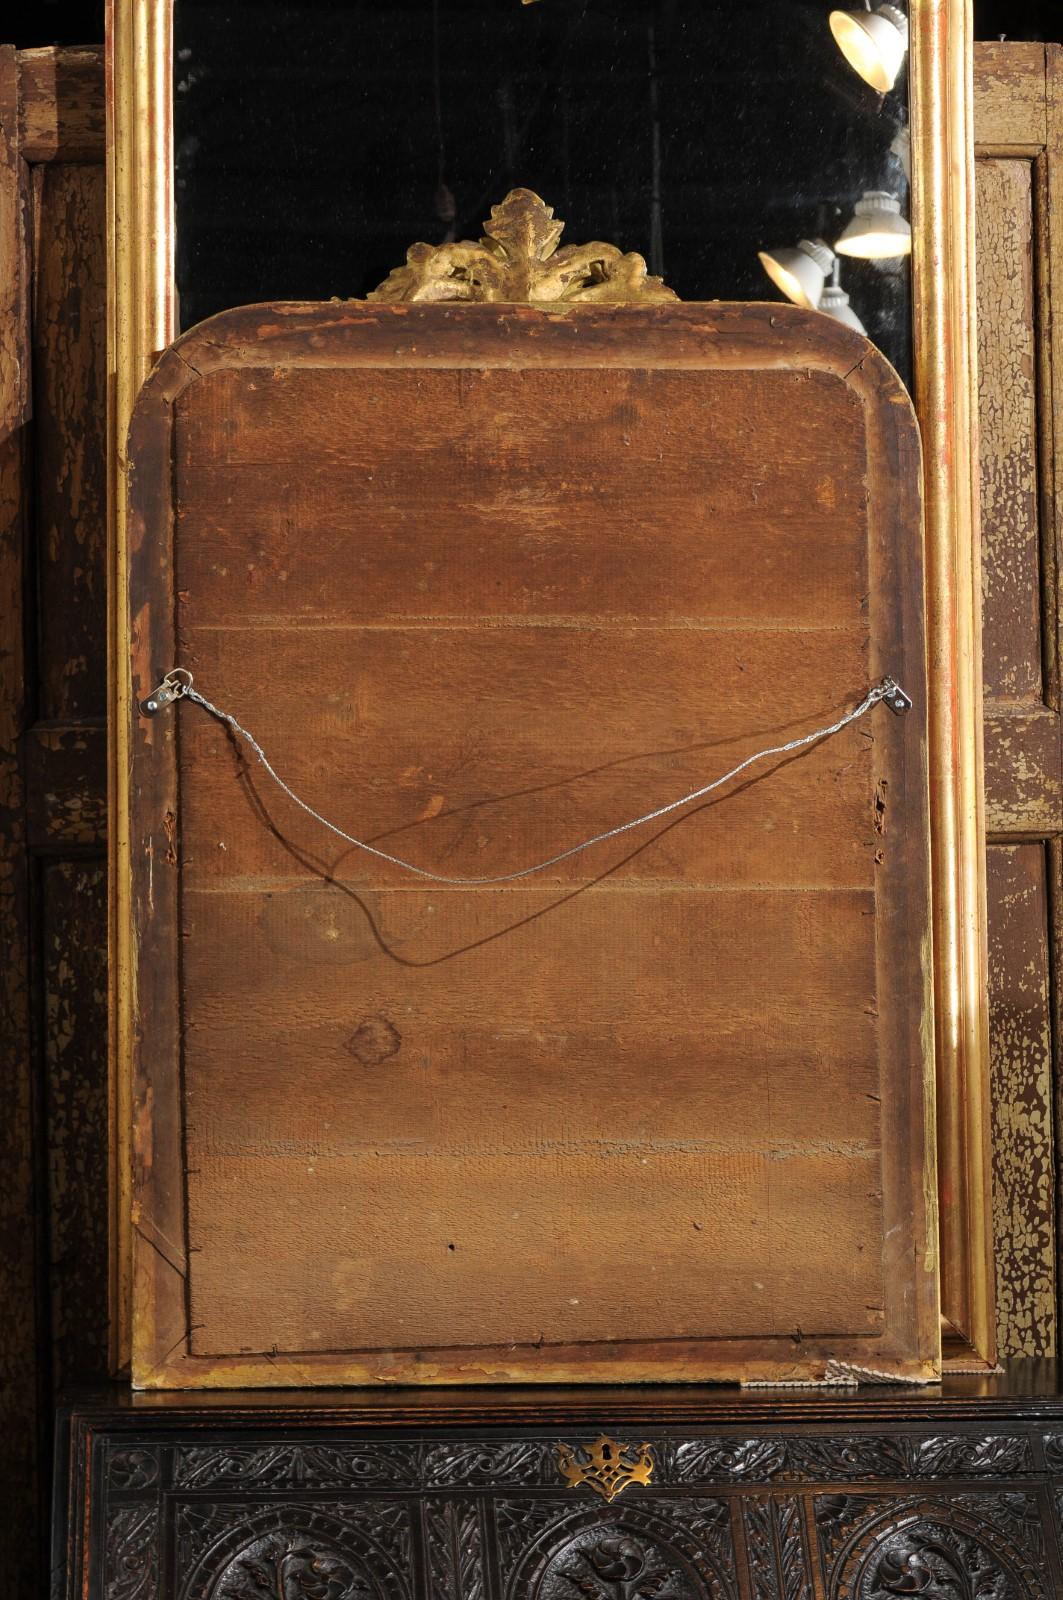 French 19th Century Painted and Parcel-Gilt Mirror with Acanthus Carved Crest (19. Jahrhundert)